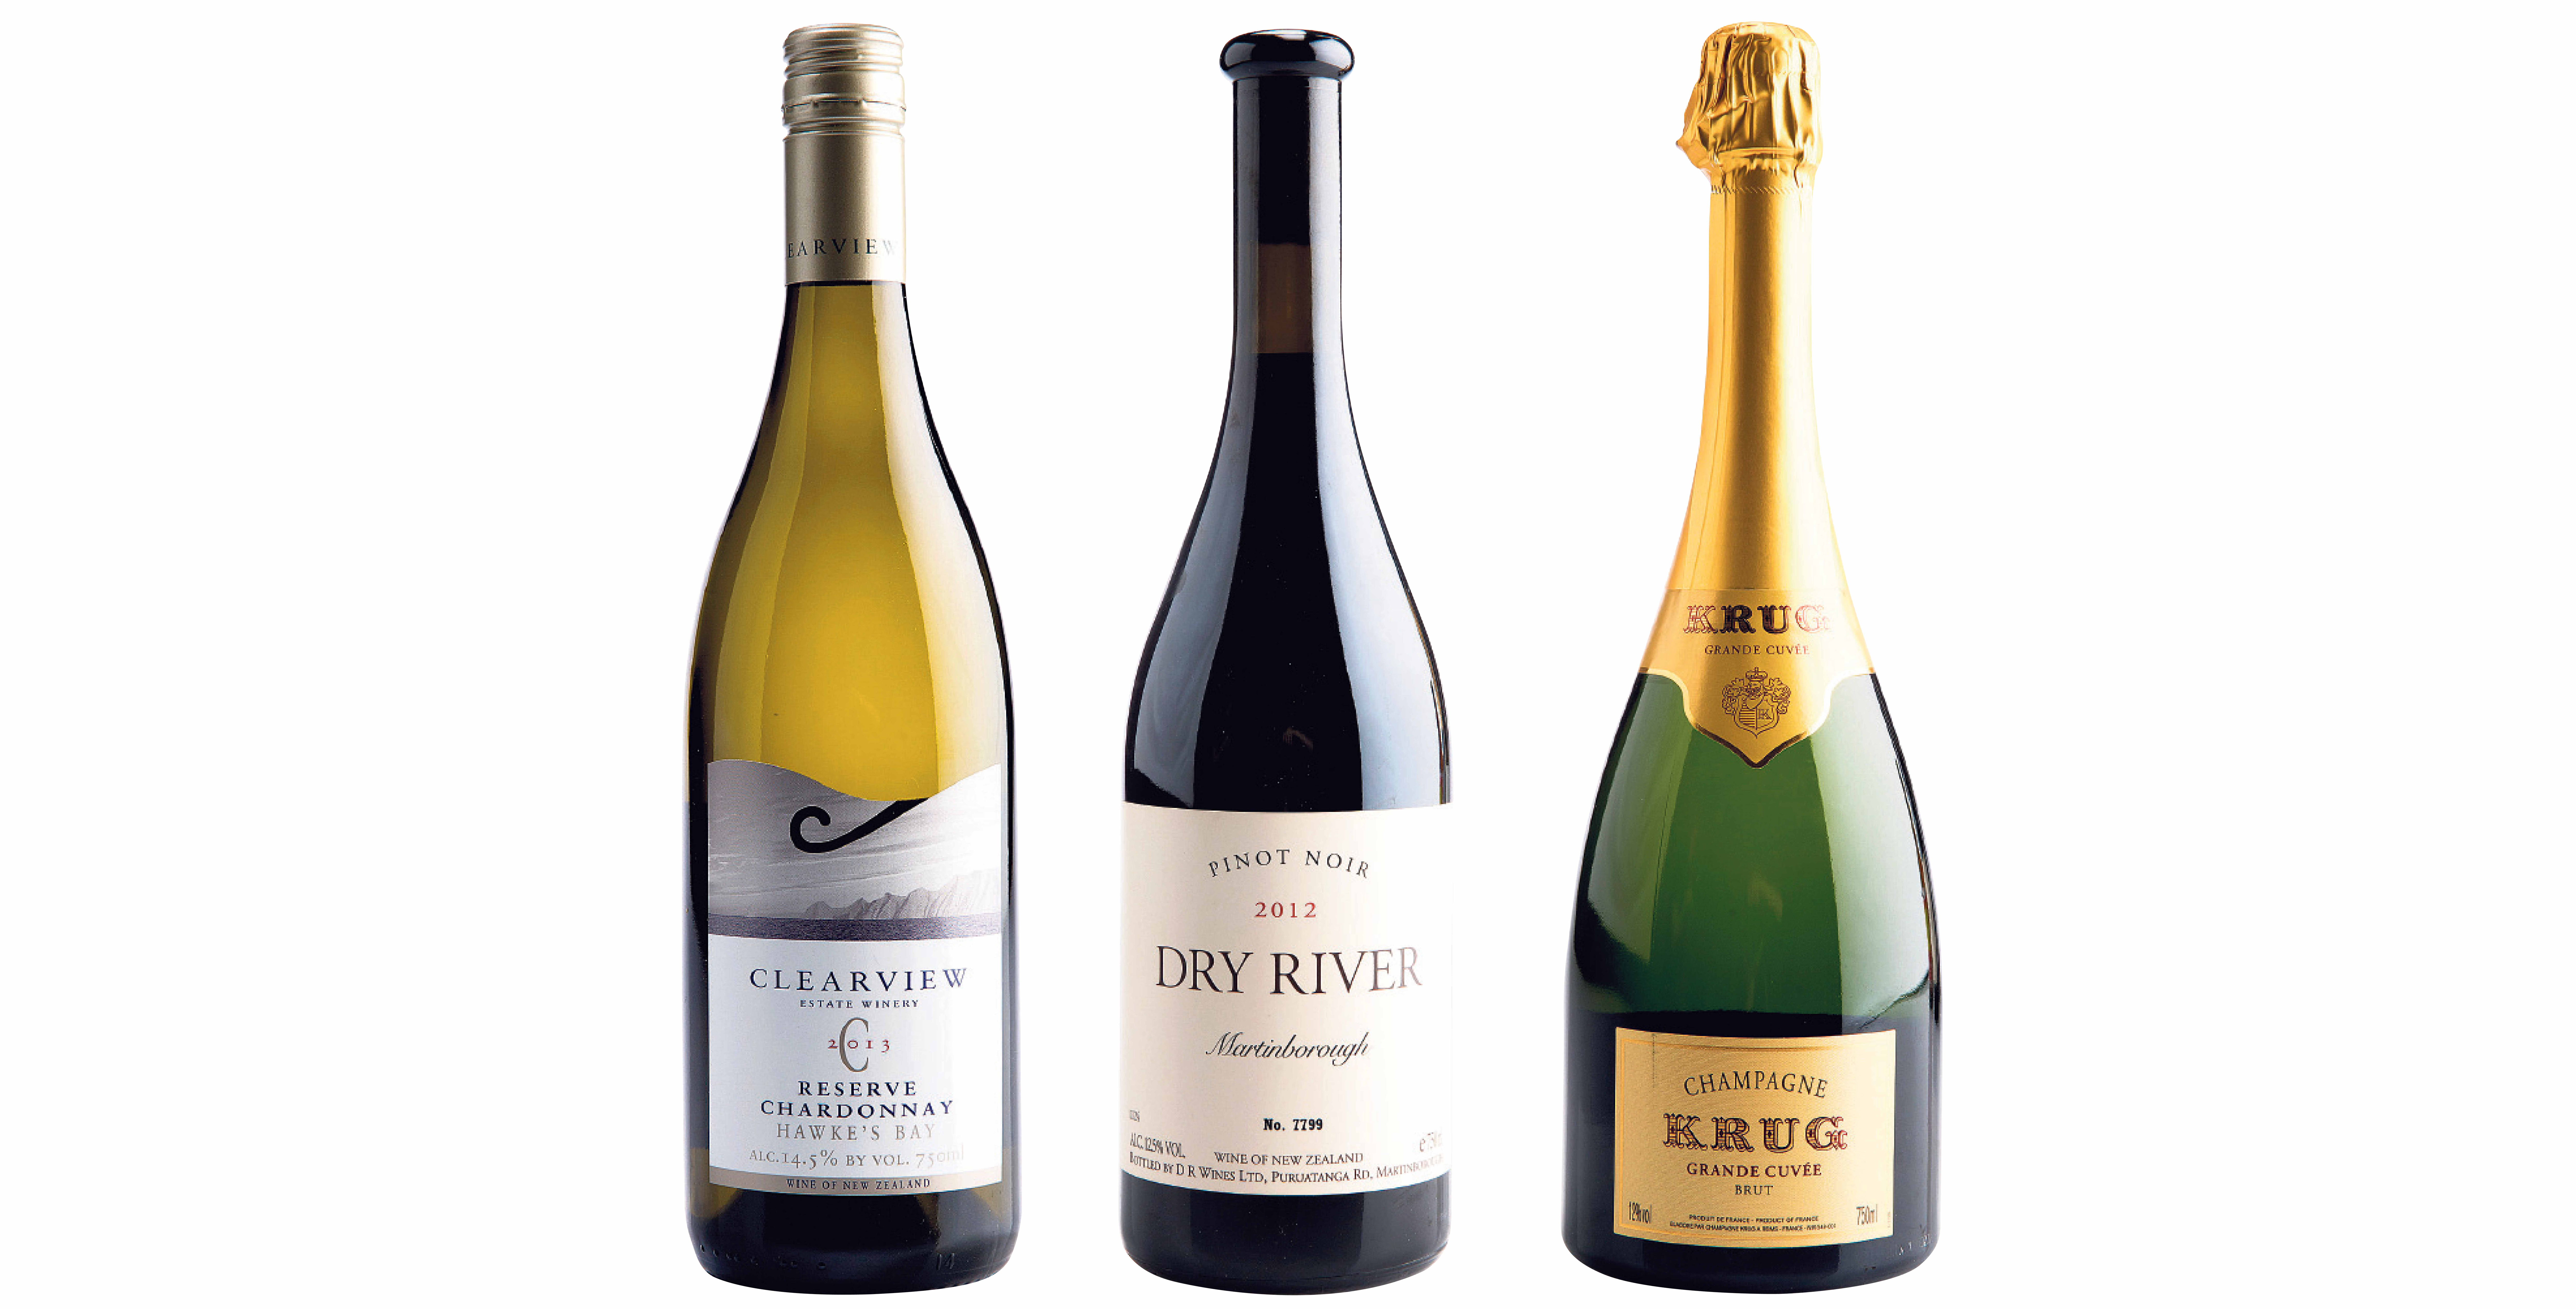 Clearview Reserve Hawke's Bay Chardonnay 2013; Dry River Martinborough Pinot Noir 2012; Champagne Krug Grande Cuvee Brut NV. Photos / Supplied.